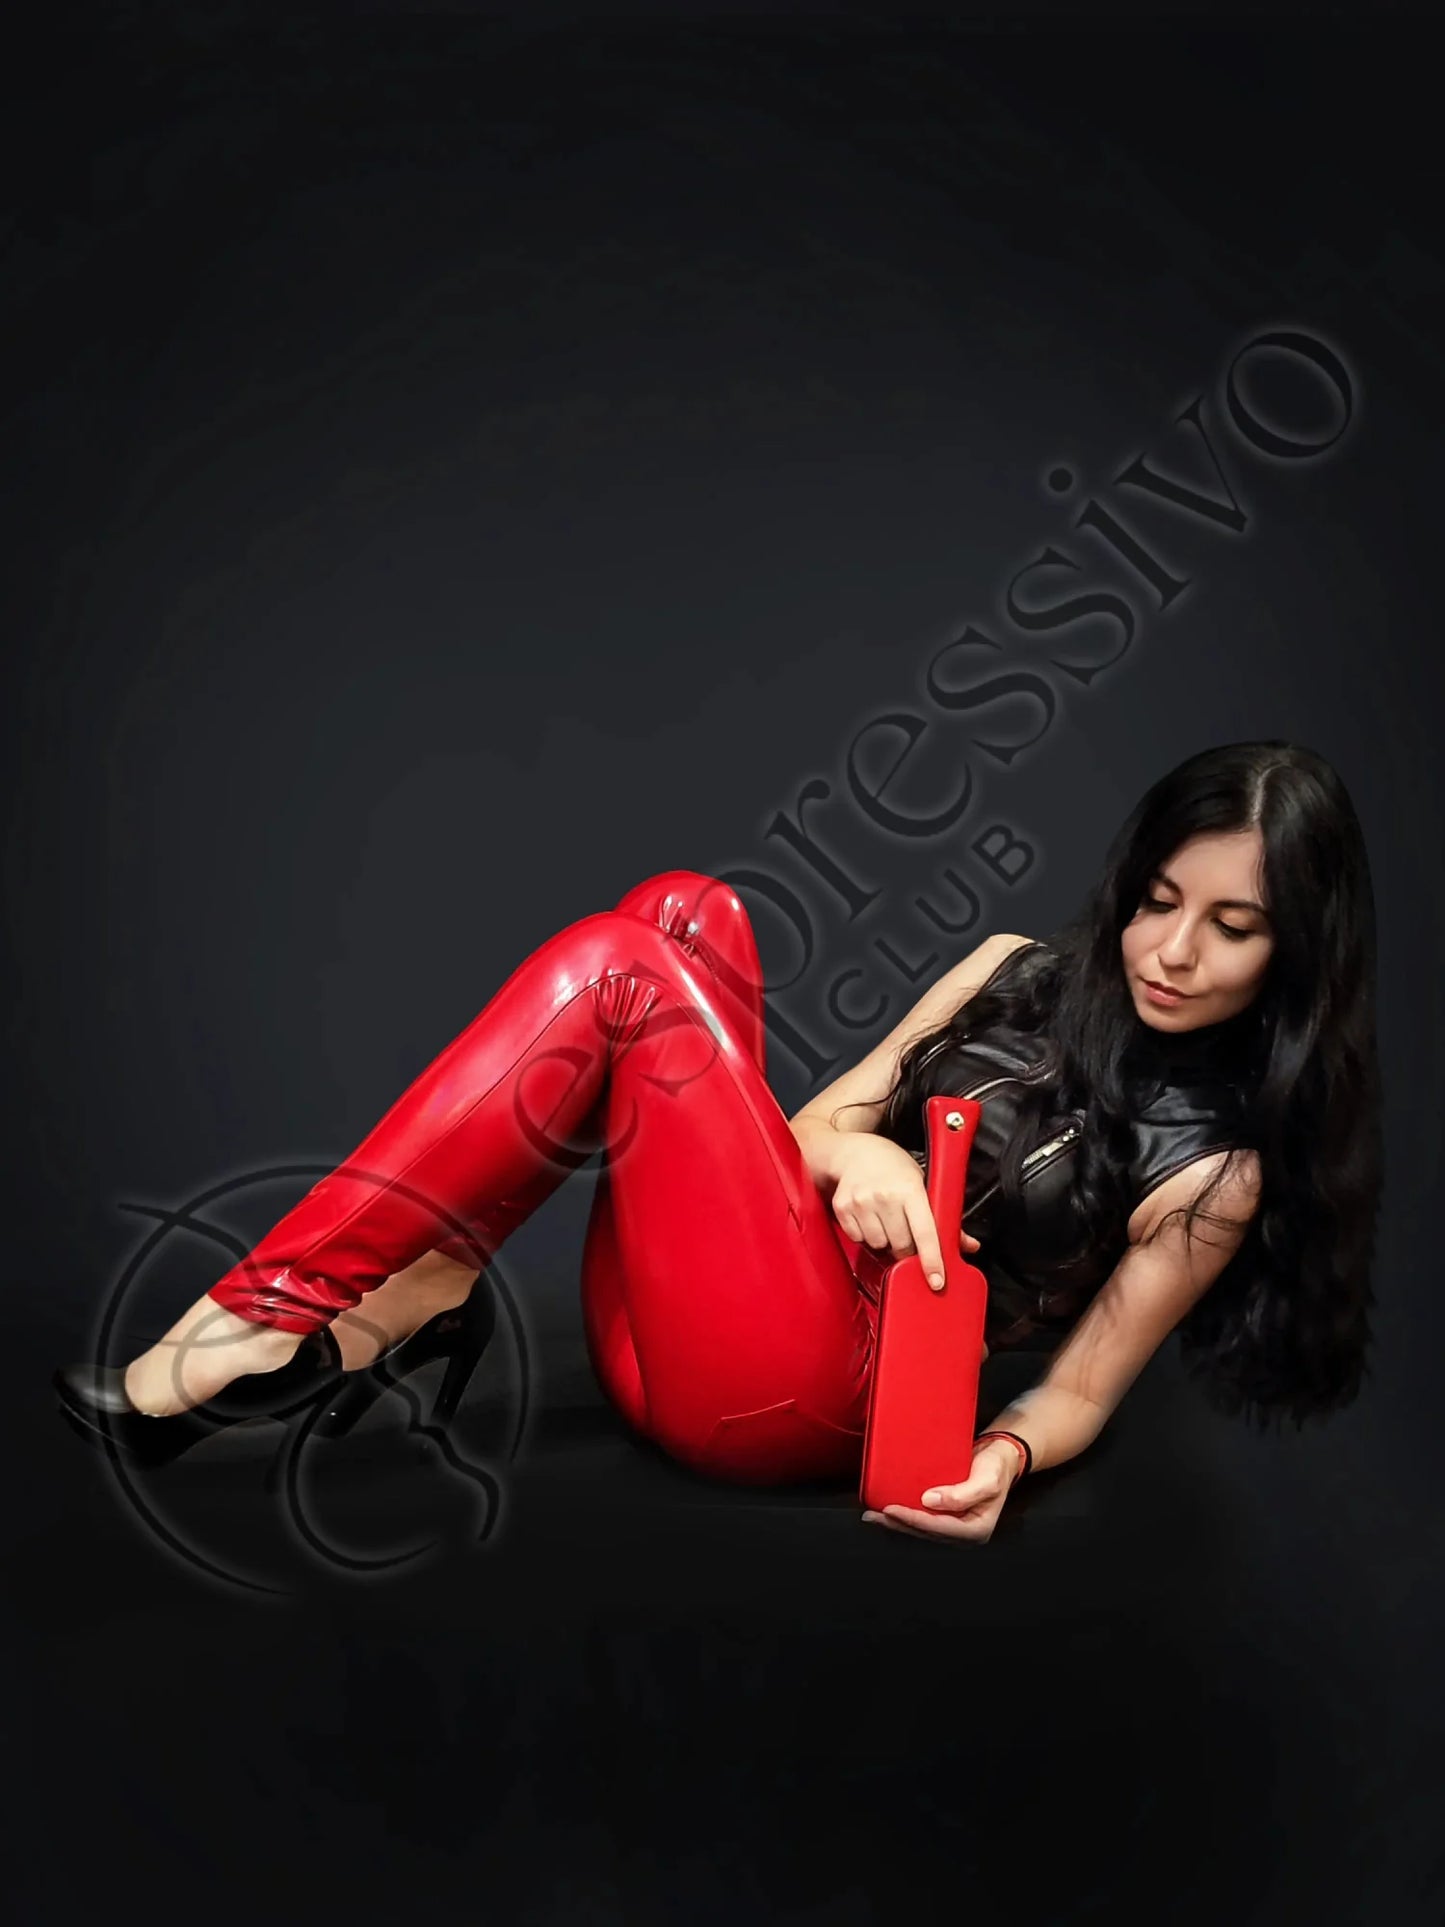 Fetish model in black leather top and red vinyl leggings holding a Red BDSM leather covered three layered wooden spanking paddle.